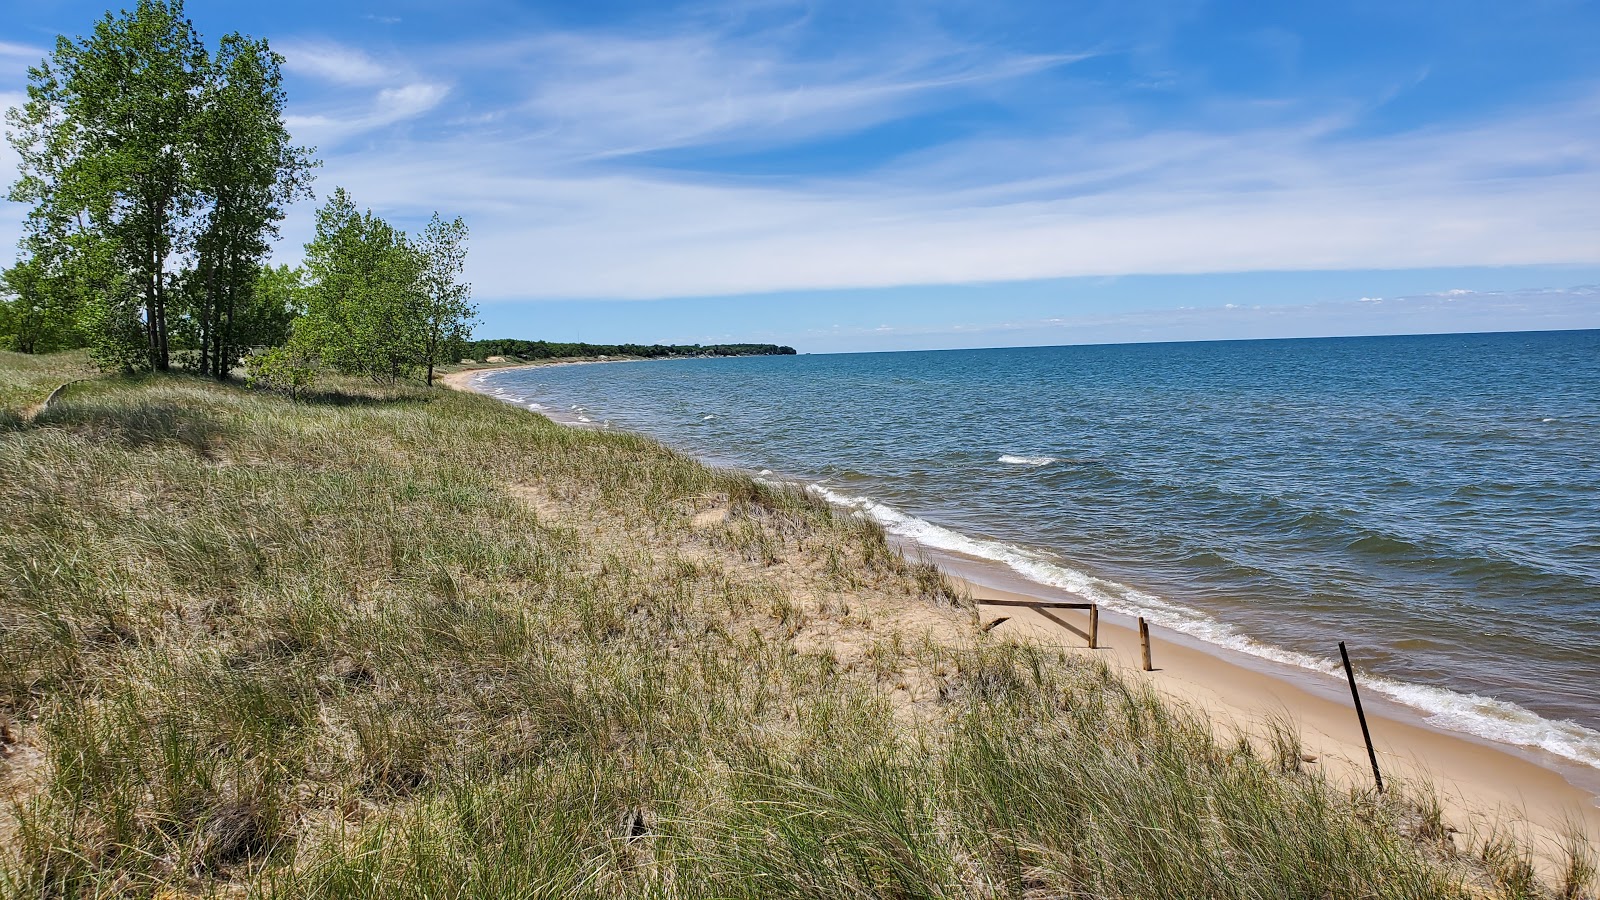 Photo of Port Crescent State Park Beach with long straight shore